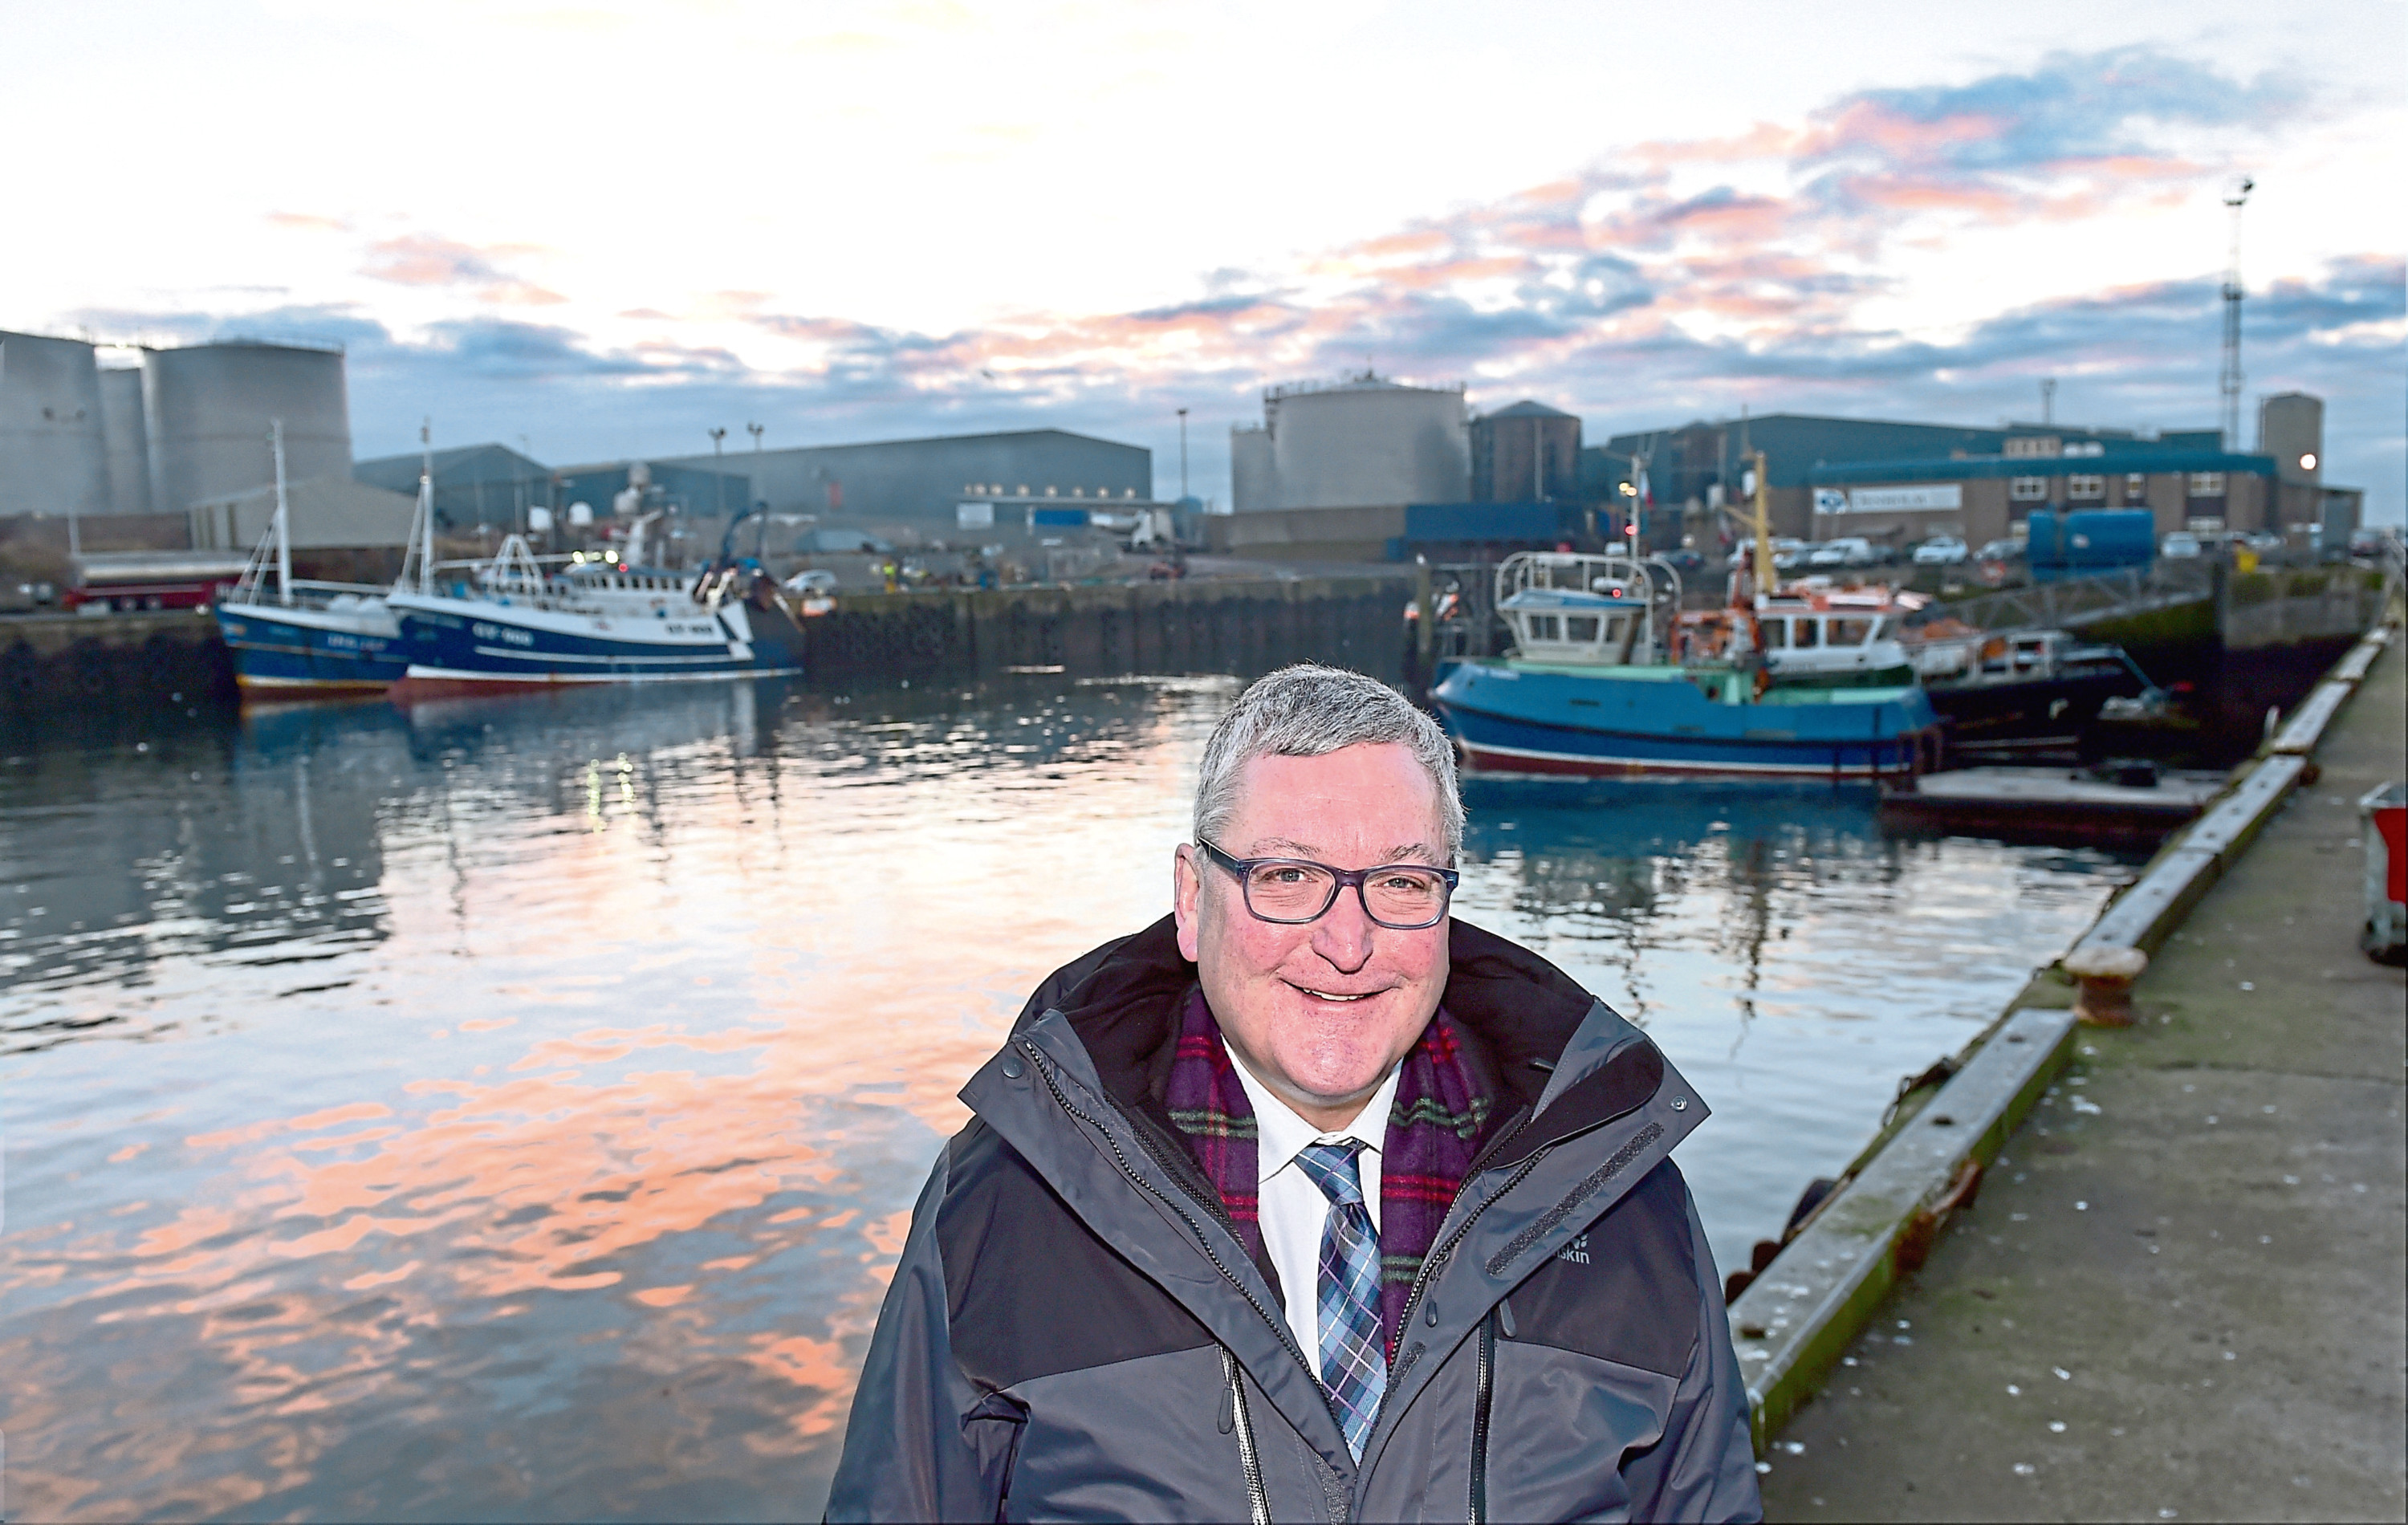 Fisheries Minister Fergus Ewing visited Peterhead Harbour to hear details of the planned expansion of Europe's biggest fishing port.